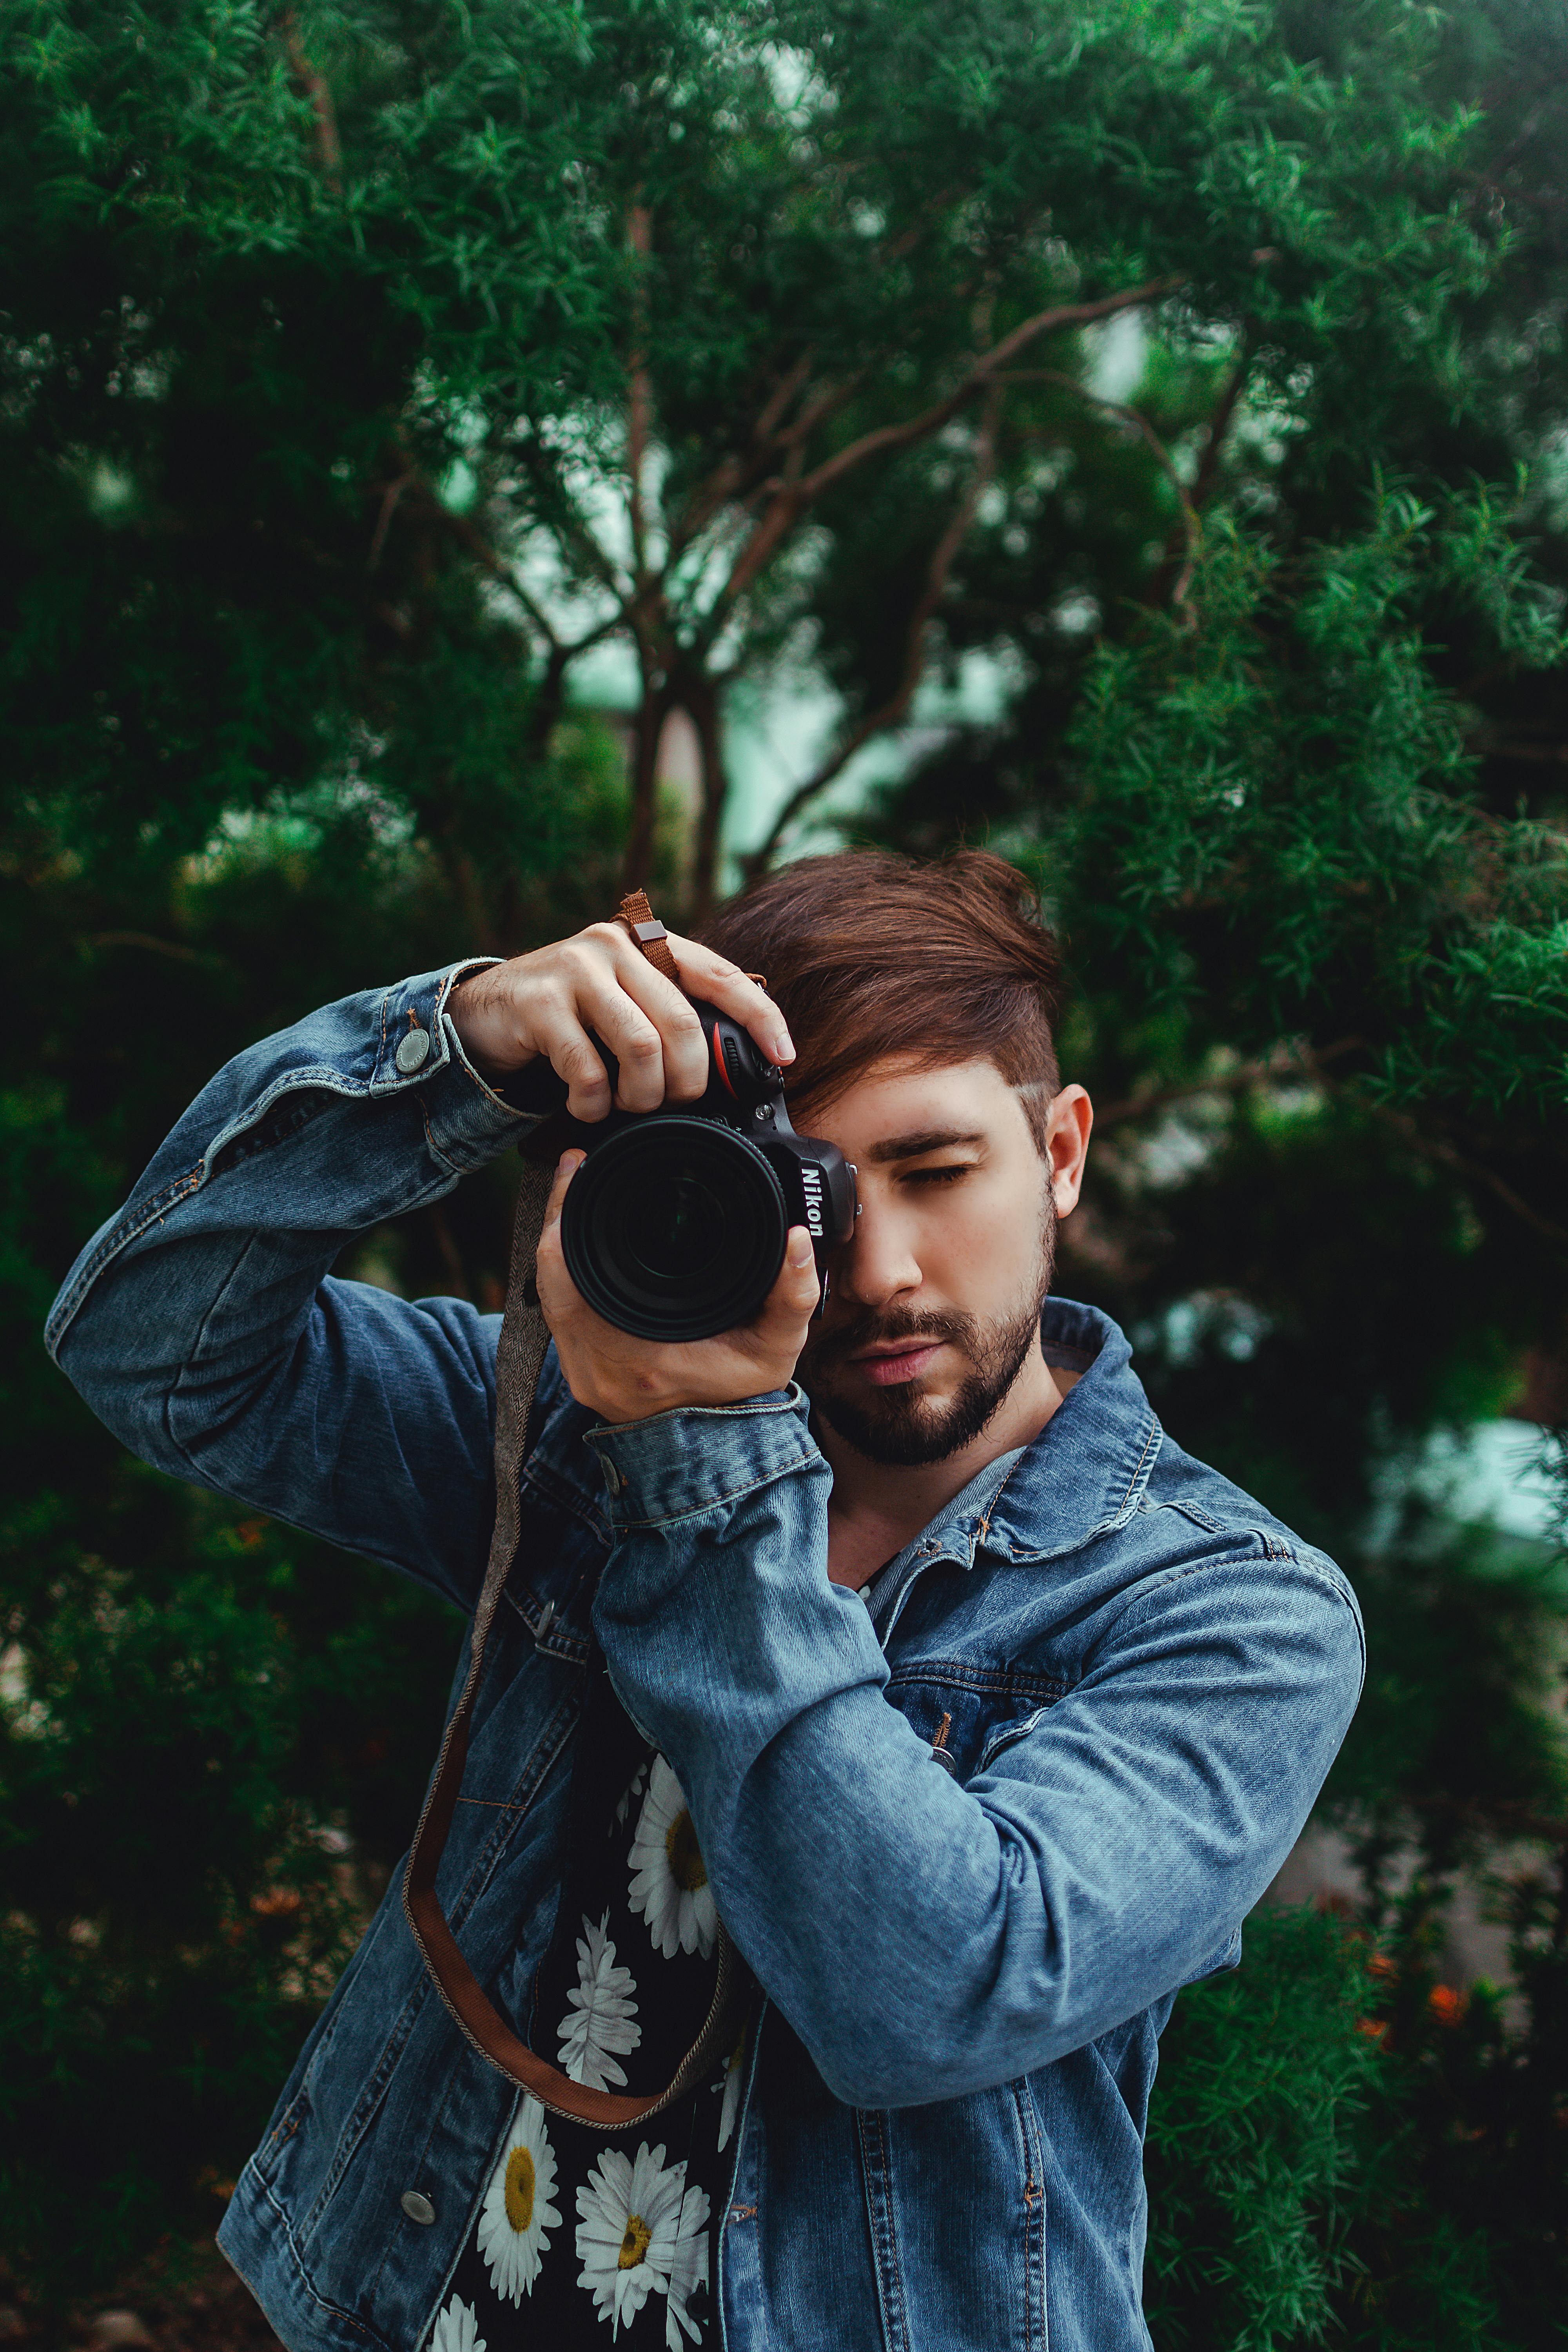 What kind of equipment do I need to begin a career in photography?